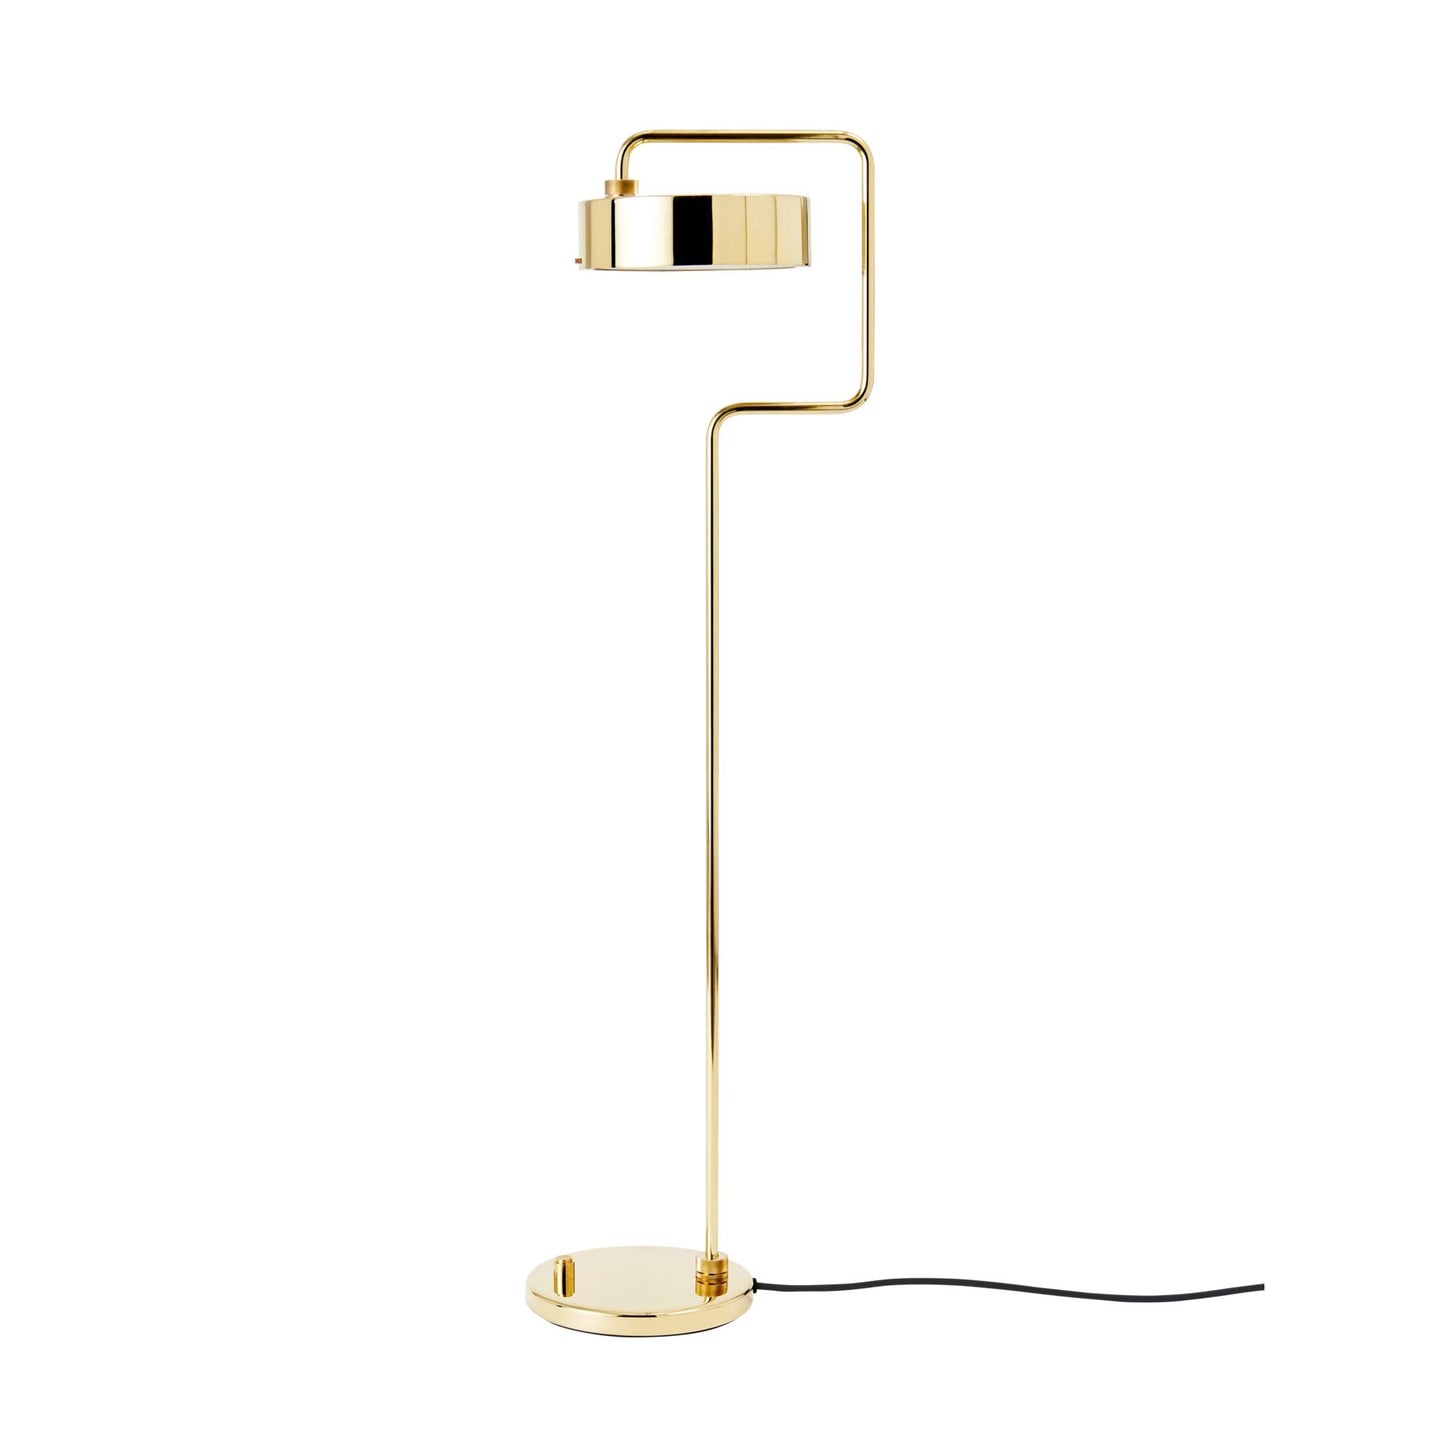 Petite Machine Floor Lamp 01 by Made By Hand #Brass